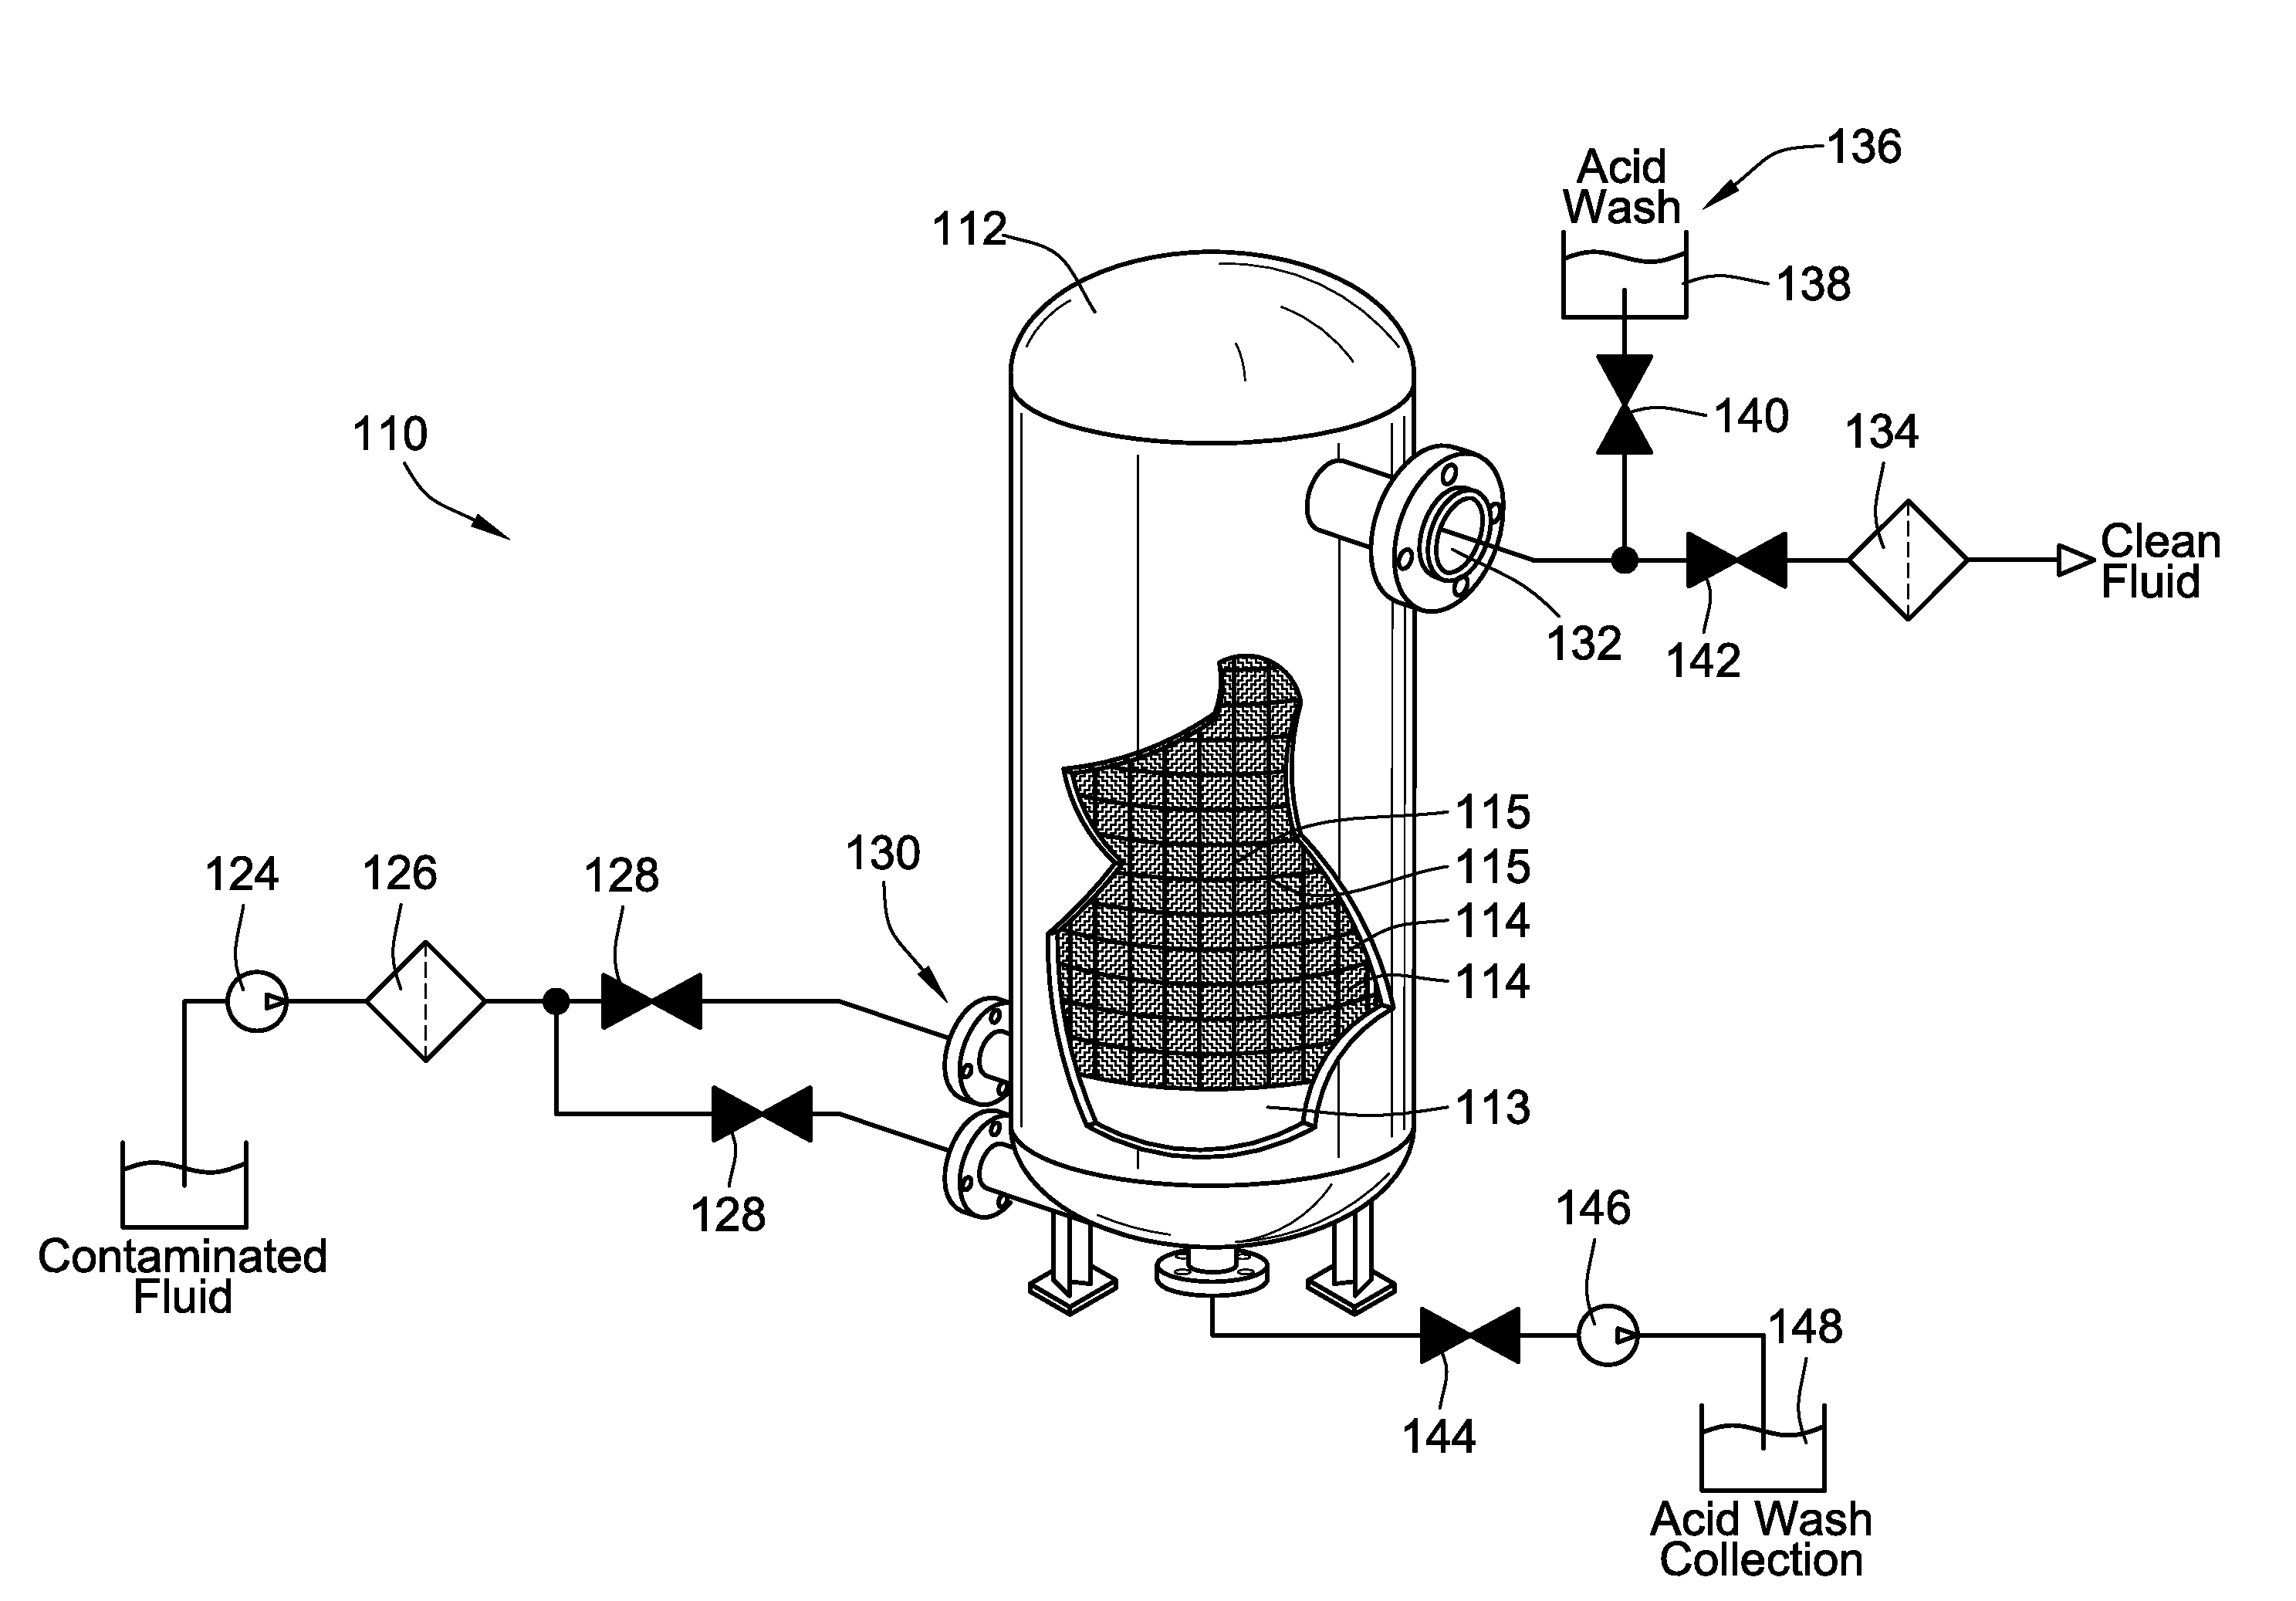 Contaminant adsorption filtration media, elements, systems and methods employing wire or other lattice support